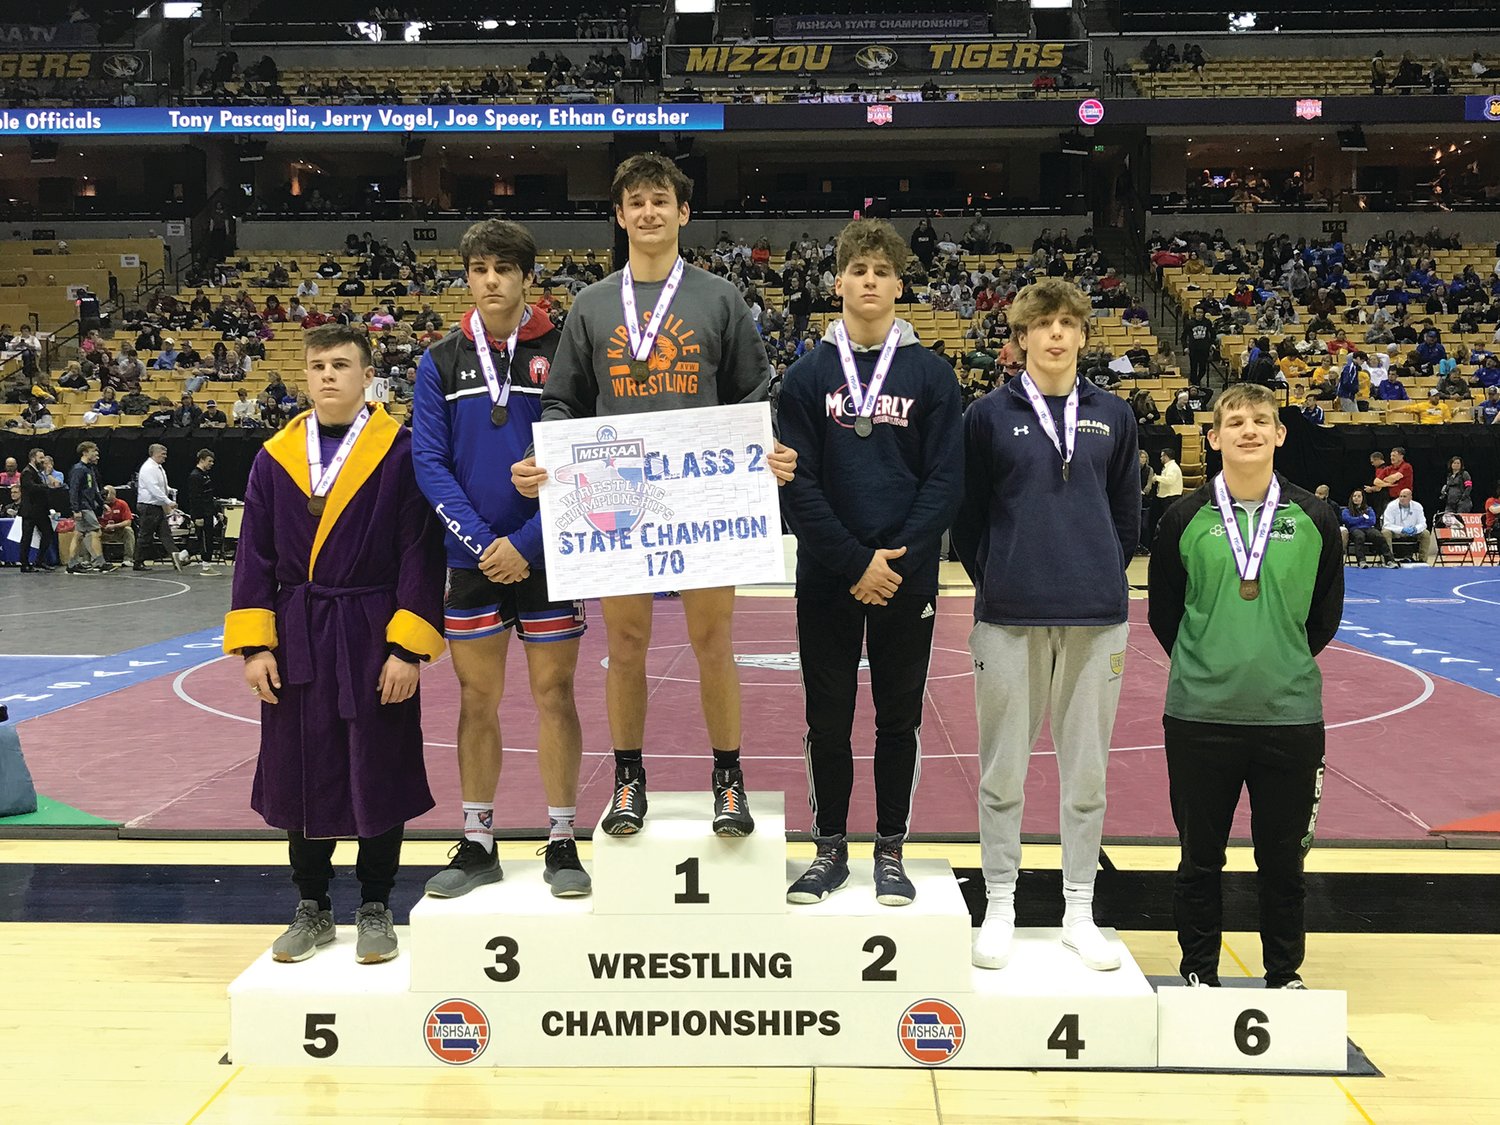 Moberly senior Zach Lewis, third from the right, stands on the medal stand after placing second in the Class 2 170-pound division Saturday. Lewis, a three-time state medalist, finished his senior year with a 43-3 record. (Will Johnson/Gasconade County Republican)